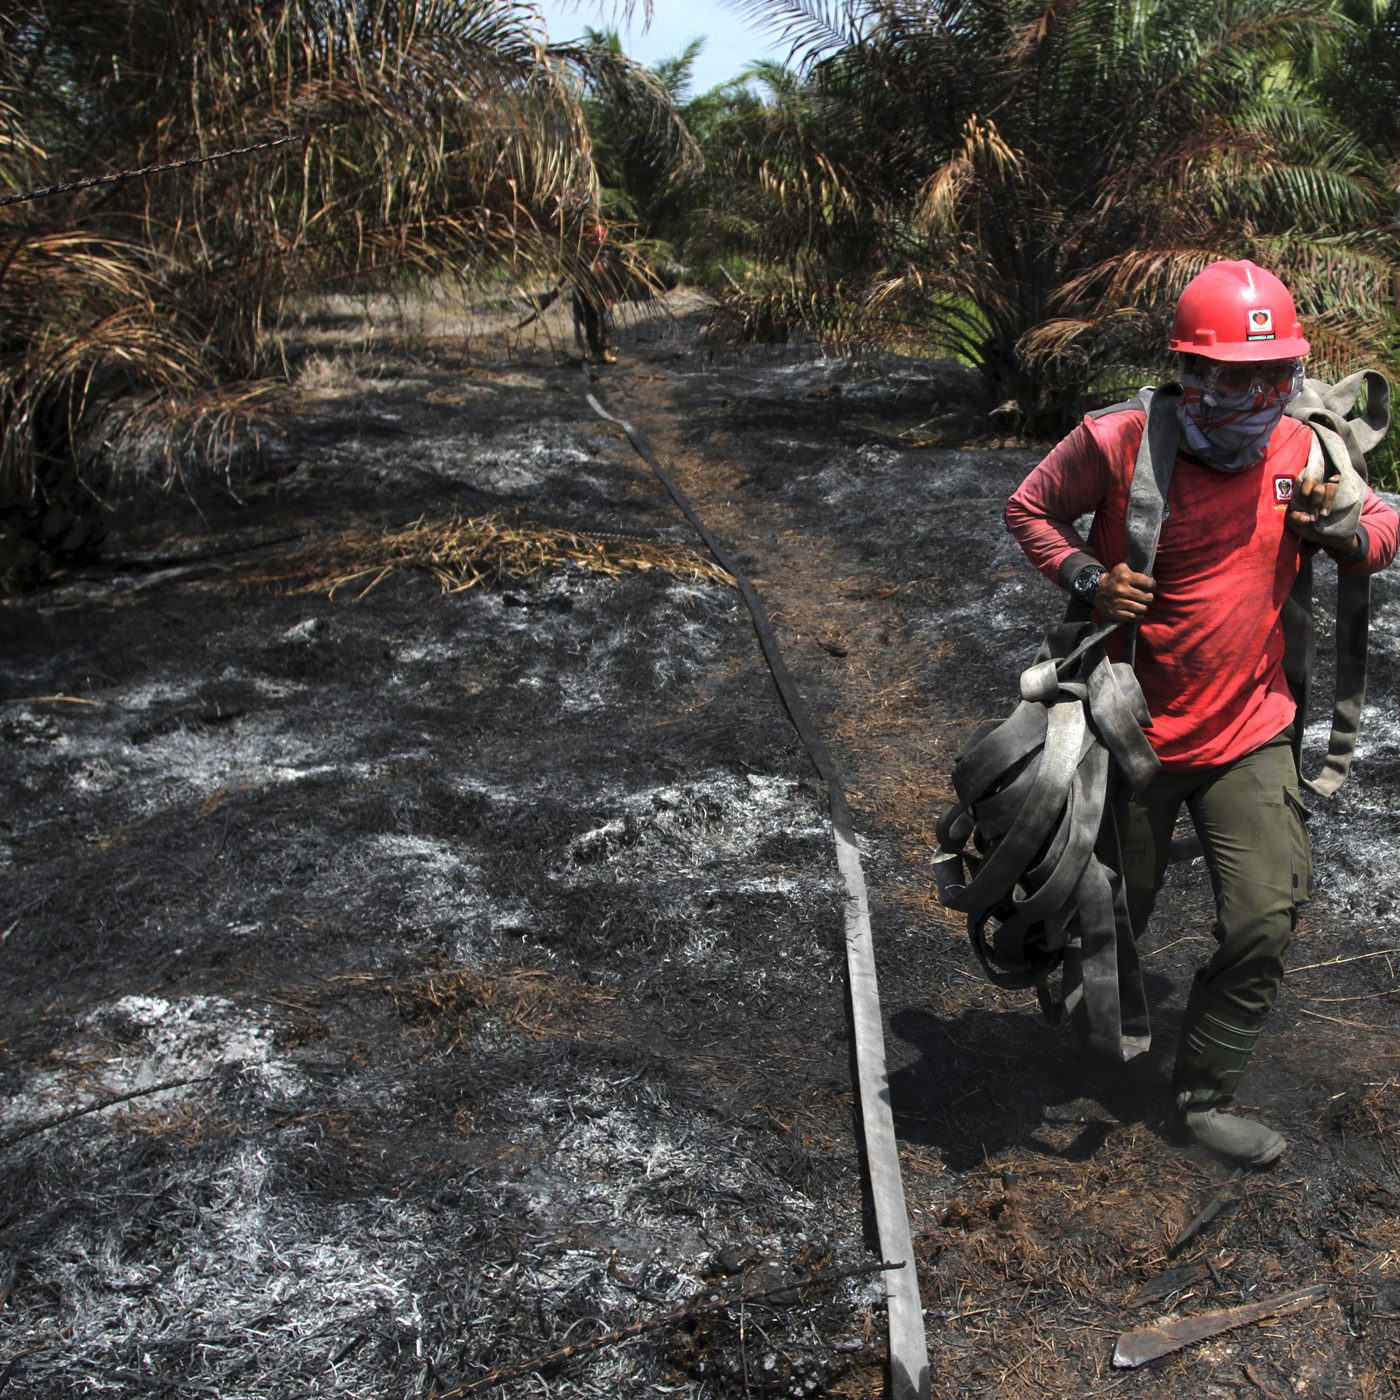 Palm Oil Production Linked to Massive Forest Fires in Indonesia